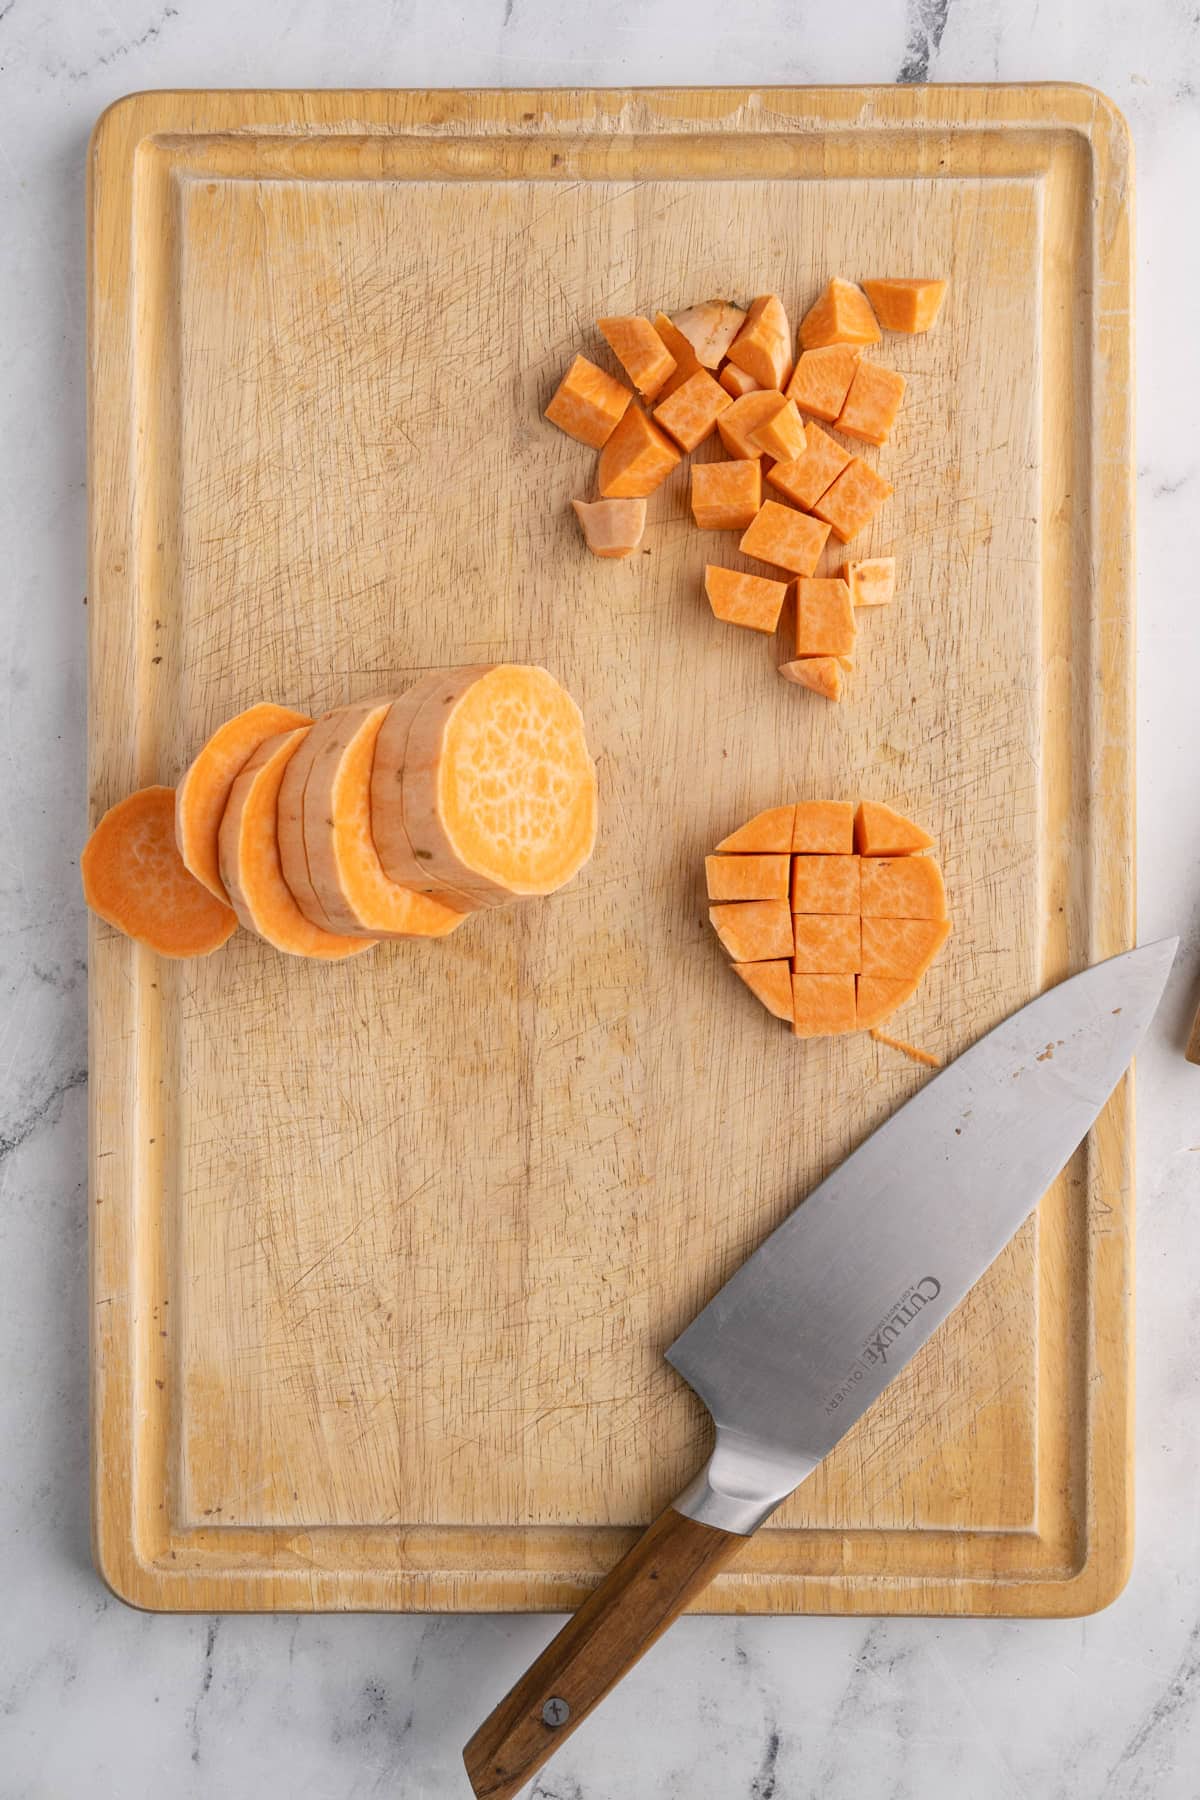 cutting sweet potato into small cubes